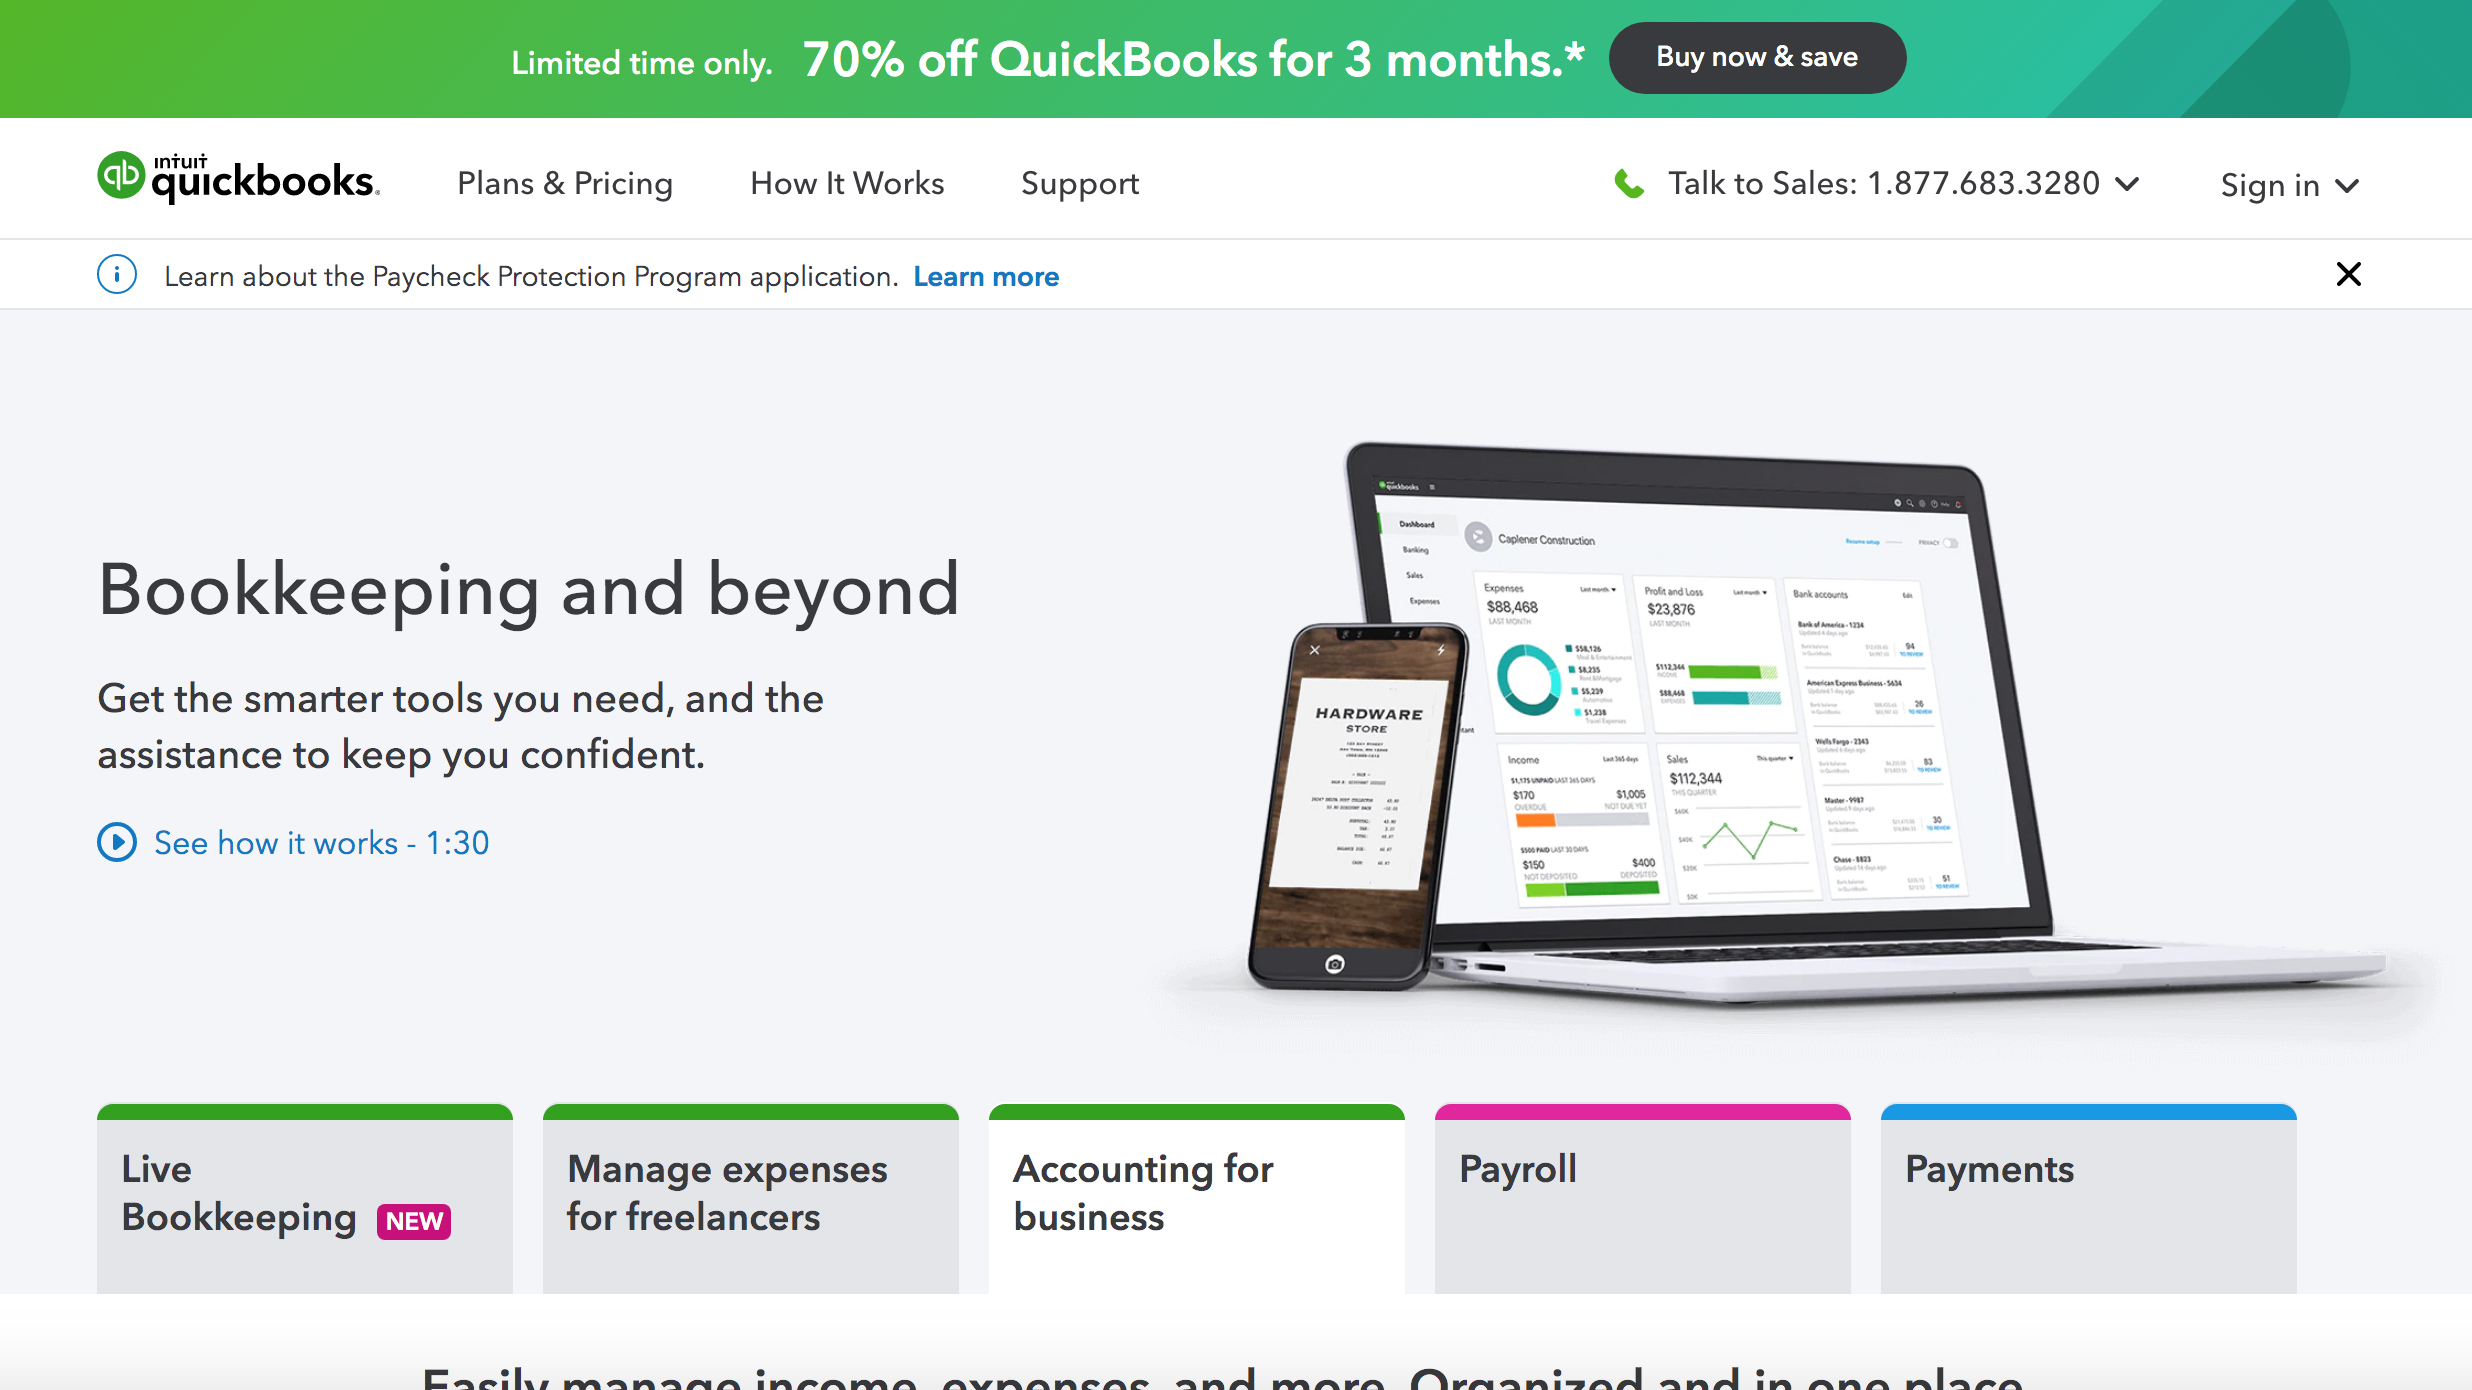 How Do I Void a Payroll Check in QuickBooks?